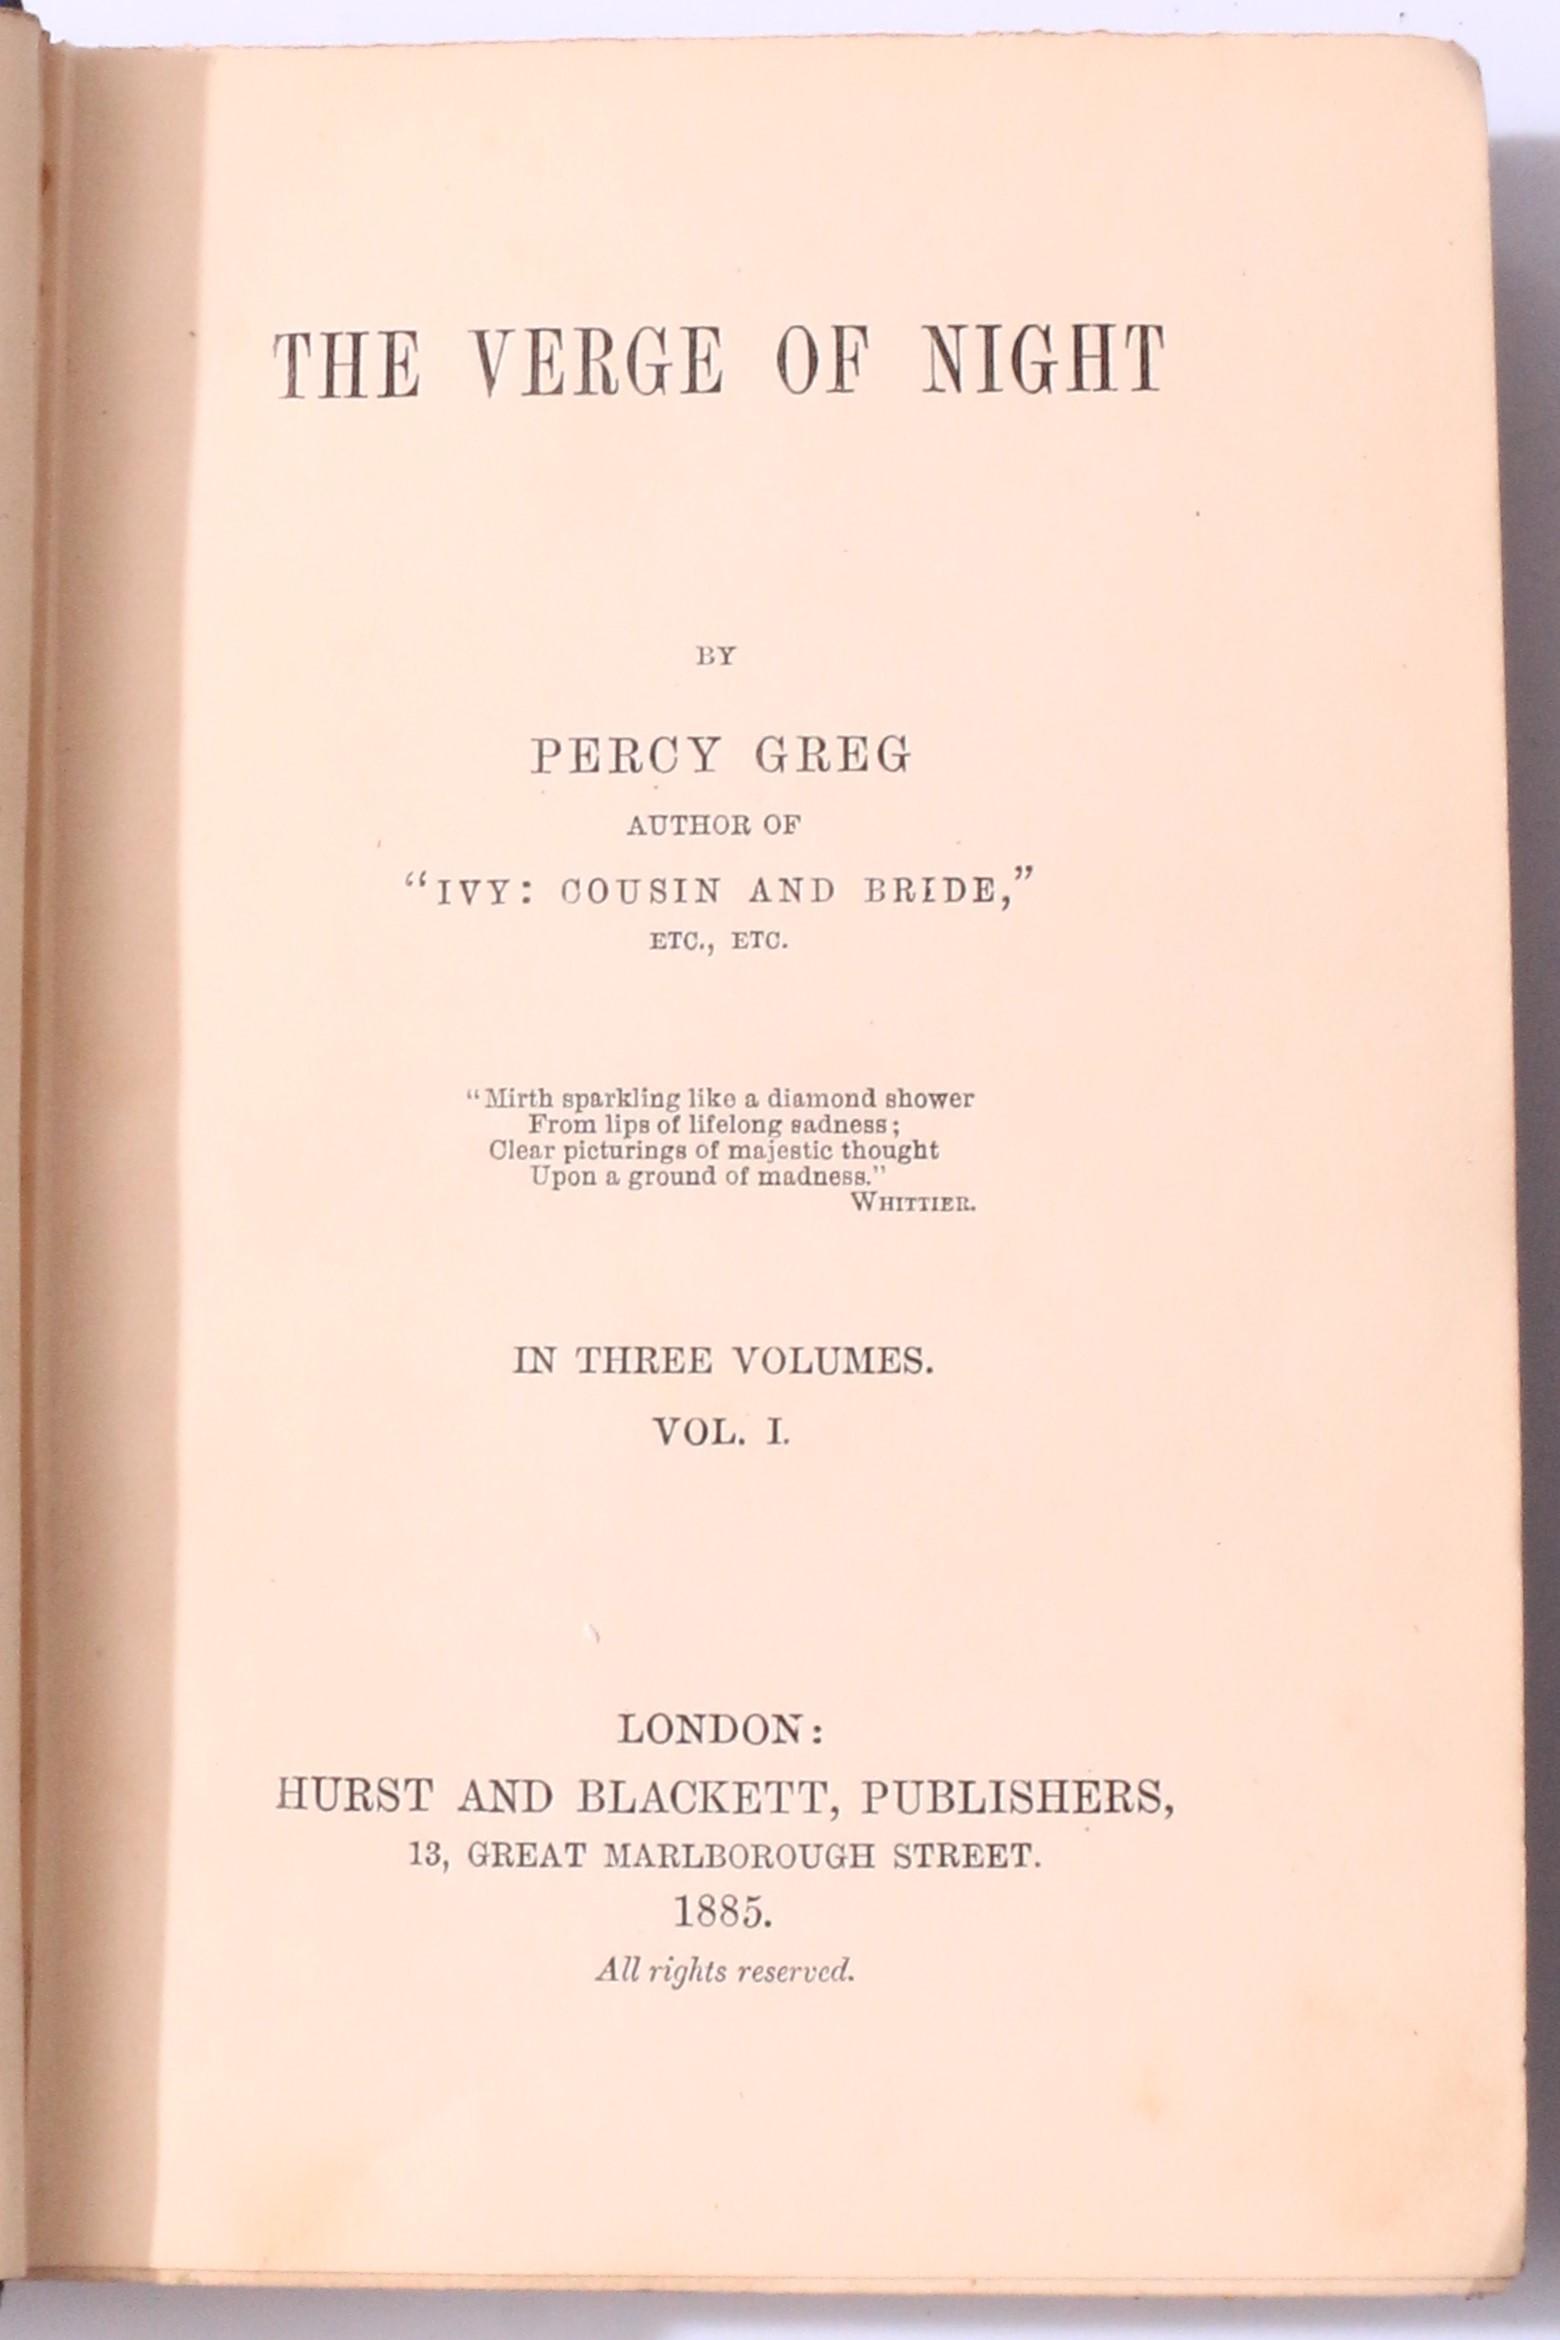 Percy Greg - Ivy: Cousin and Bride [with] The Verge of Night - Hurst & Blackett, 1881-1885, First Edition.